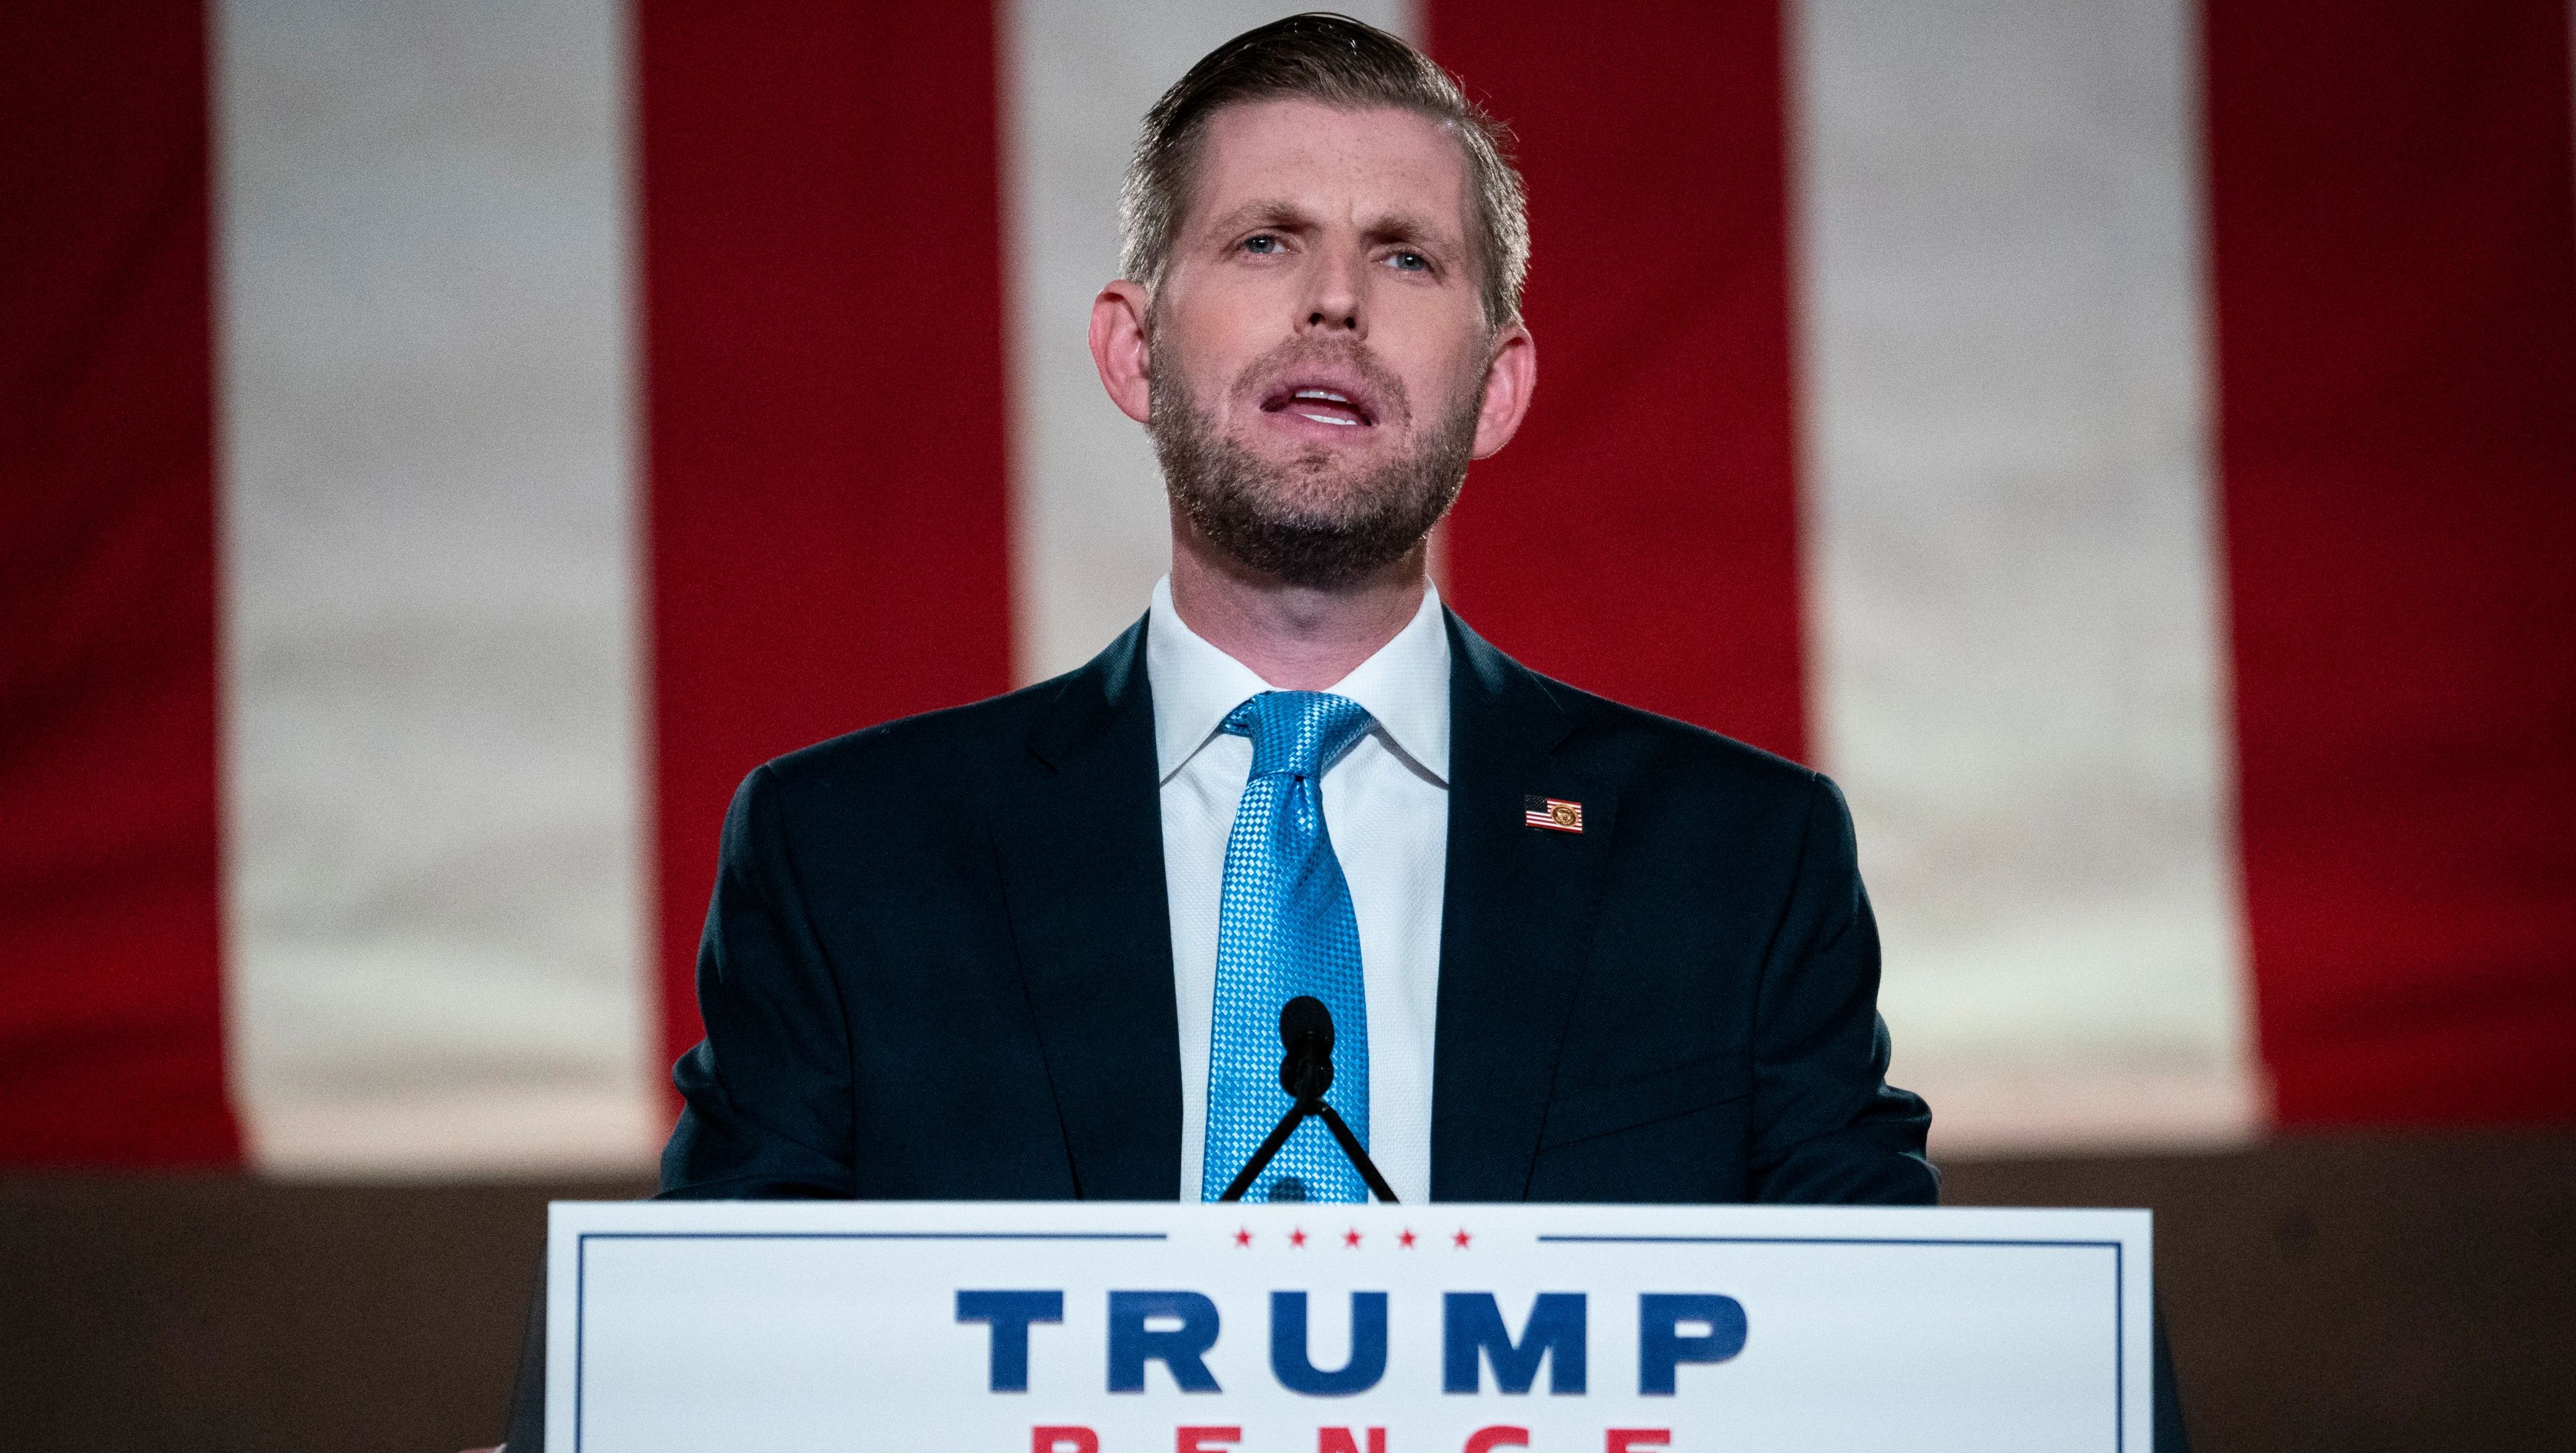 Eric Trump speaks at an event.